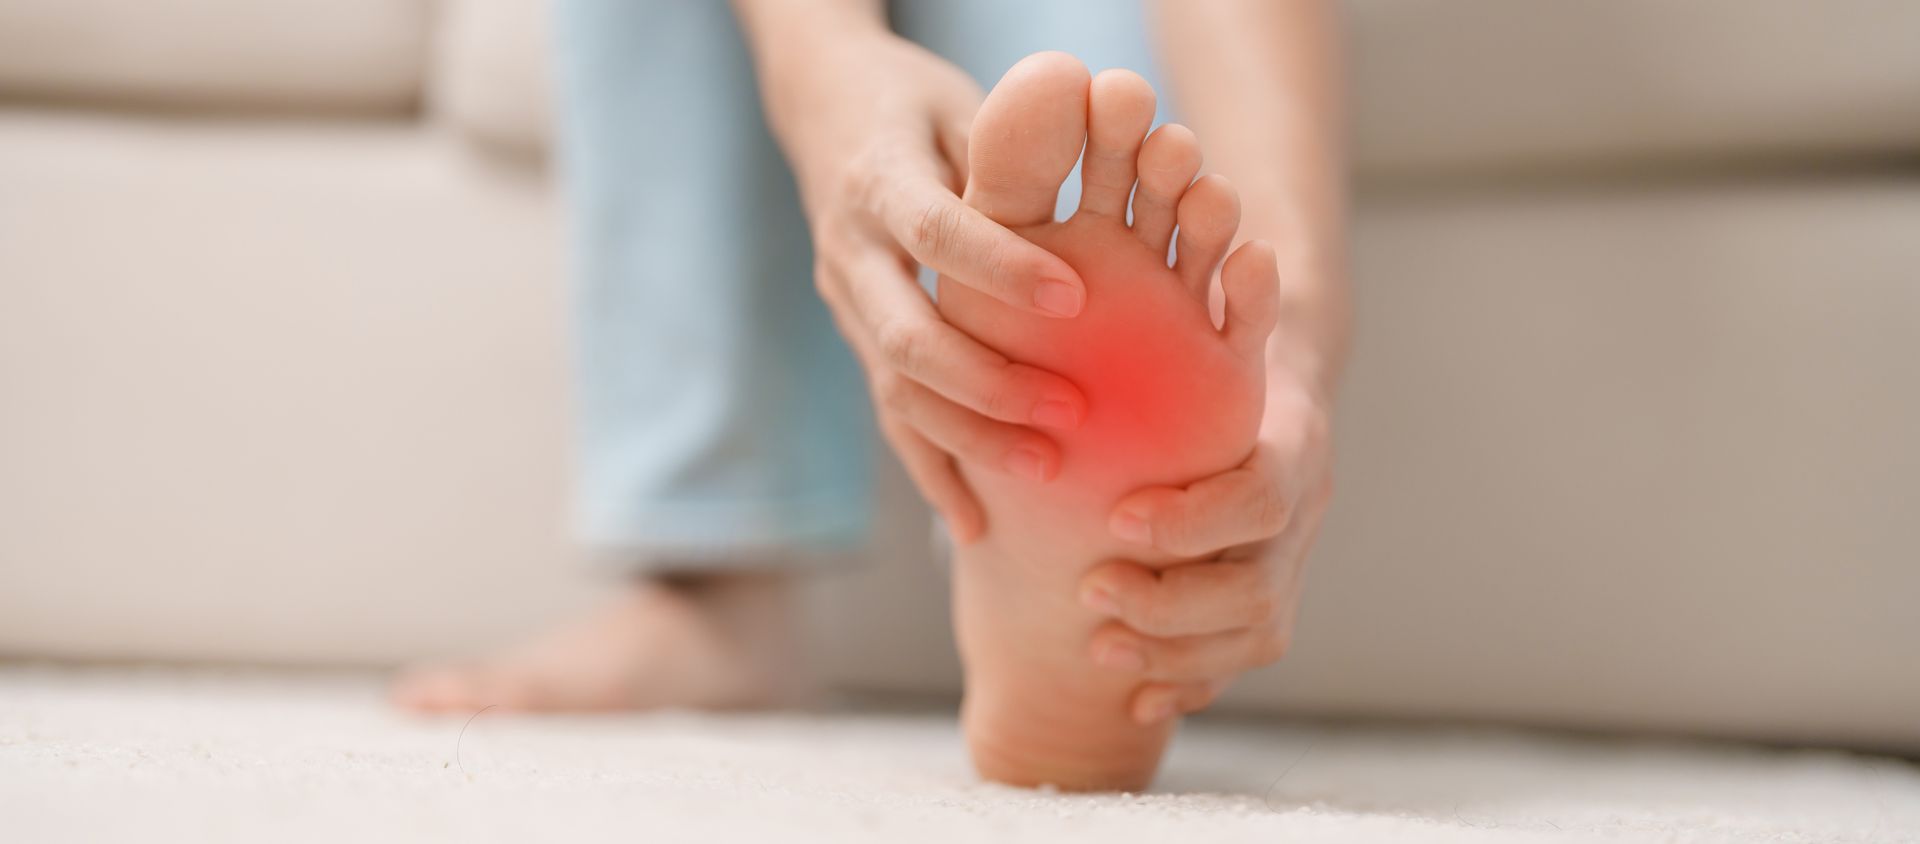 Severe Plantar Fasciitis: When is Surgery the Best Option?